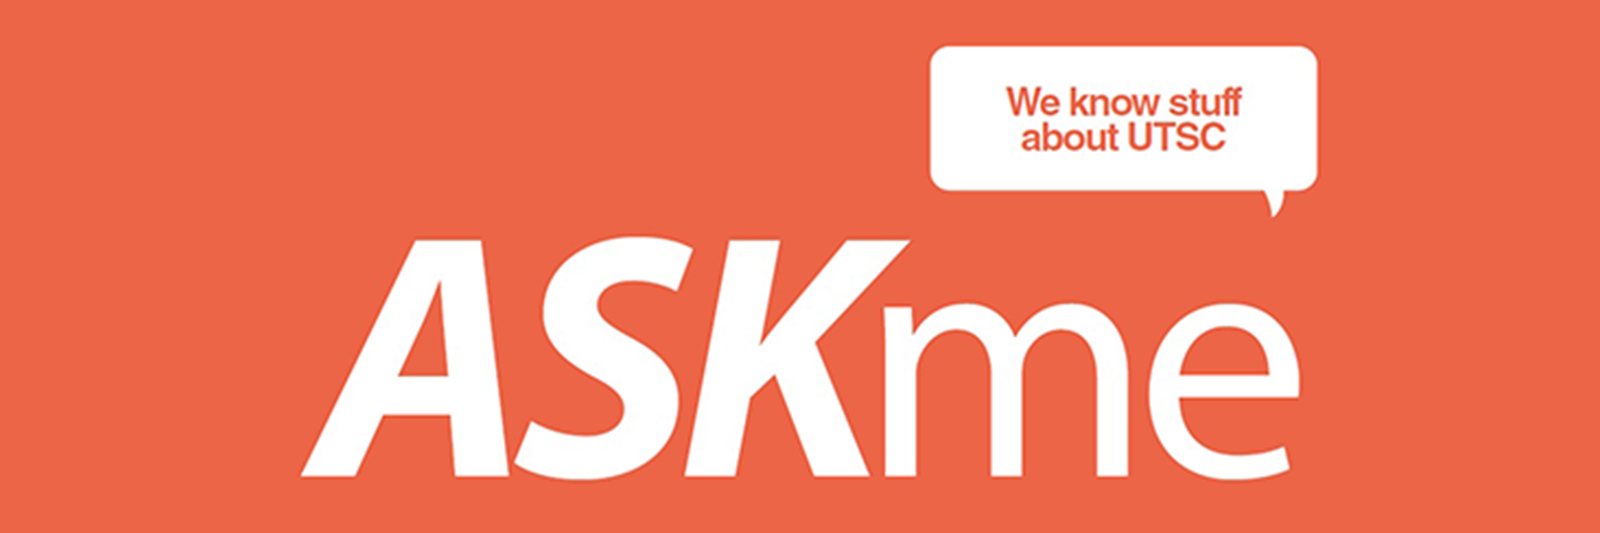 Graphic for ASKme Program by Office of Student Experience & Wellbeing at U of T Scarborough